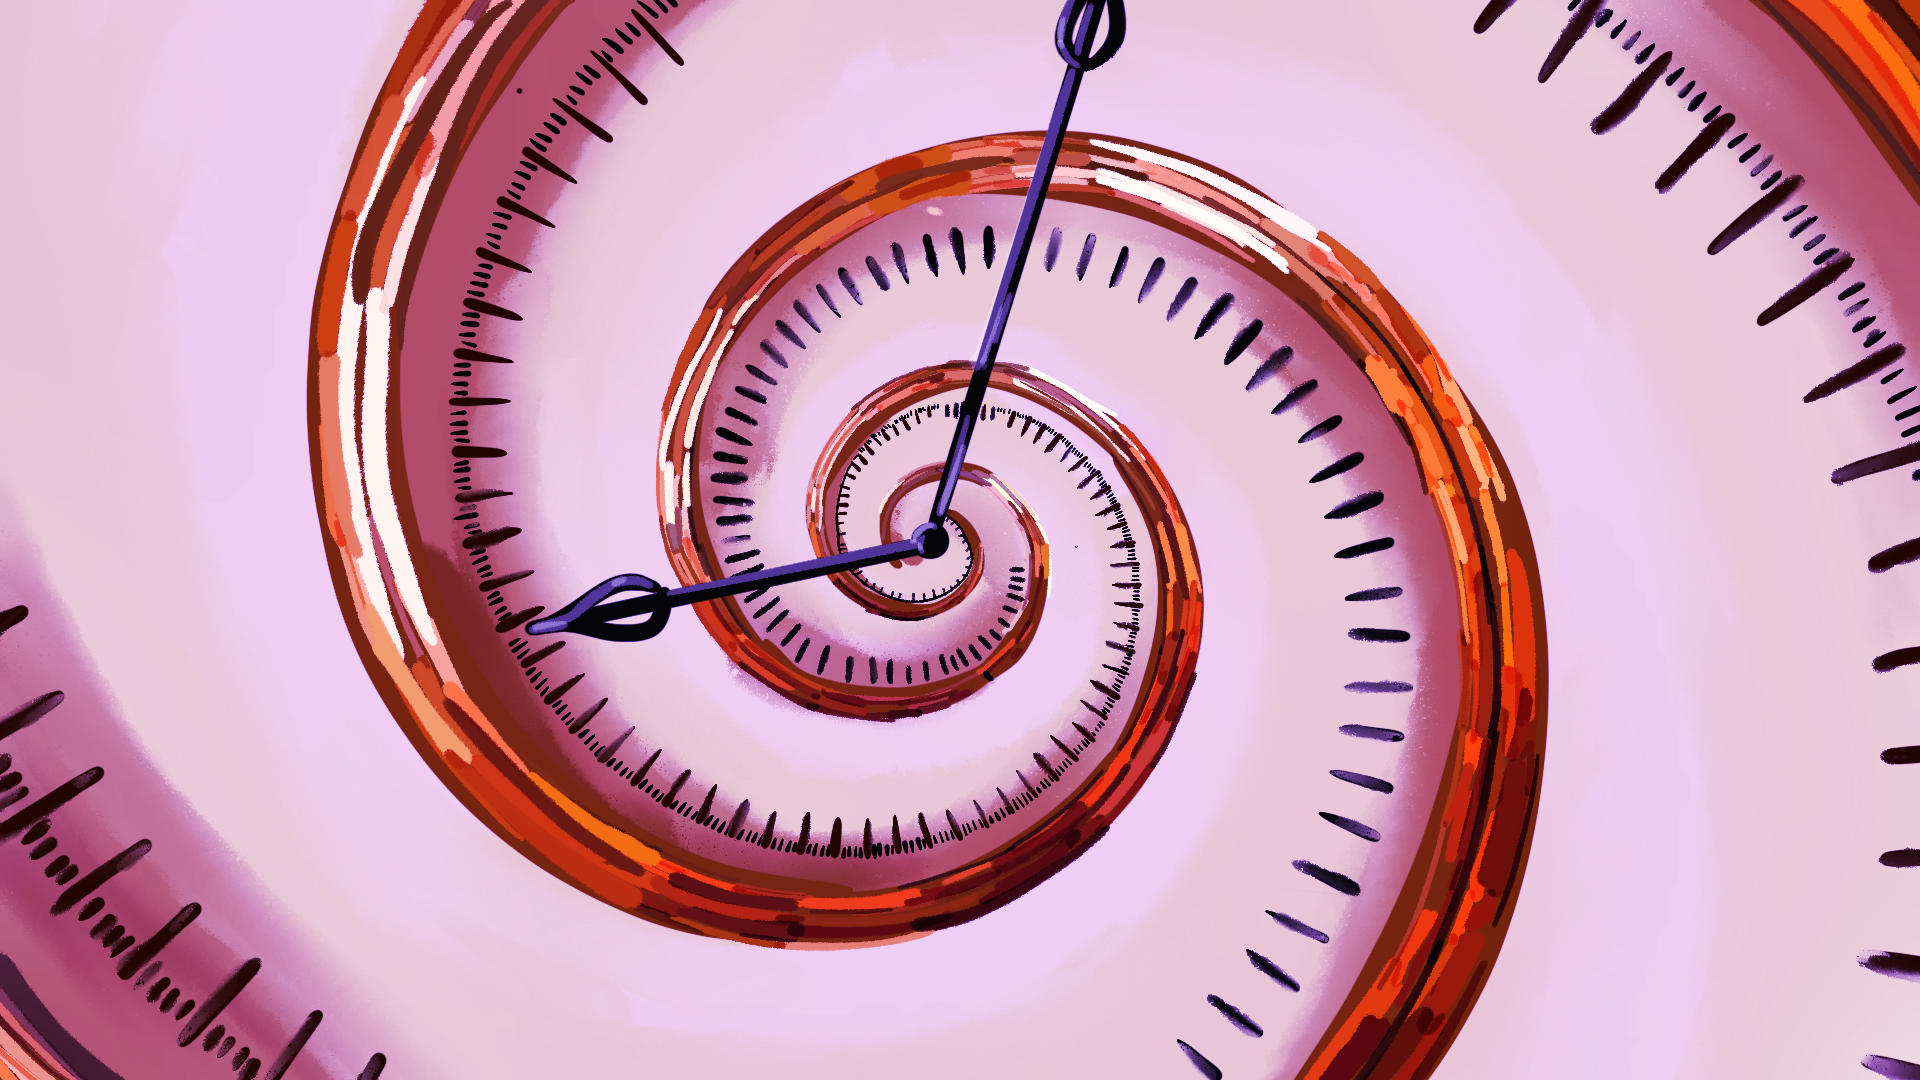 Image of a winding clock